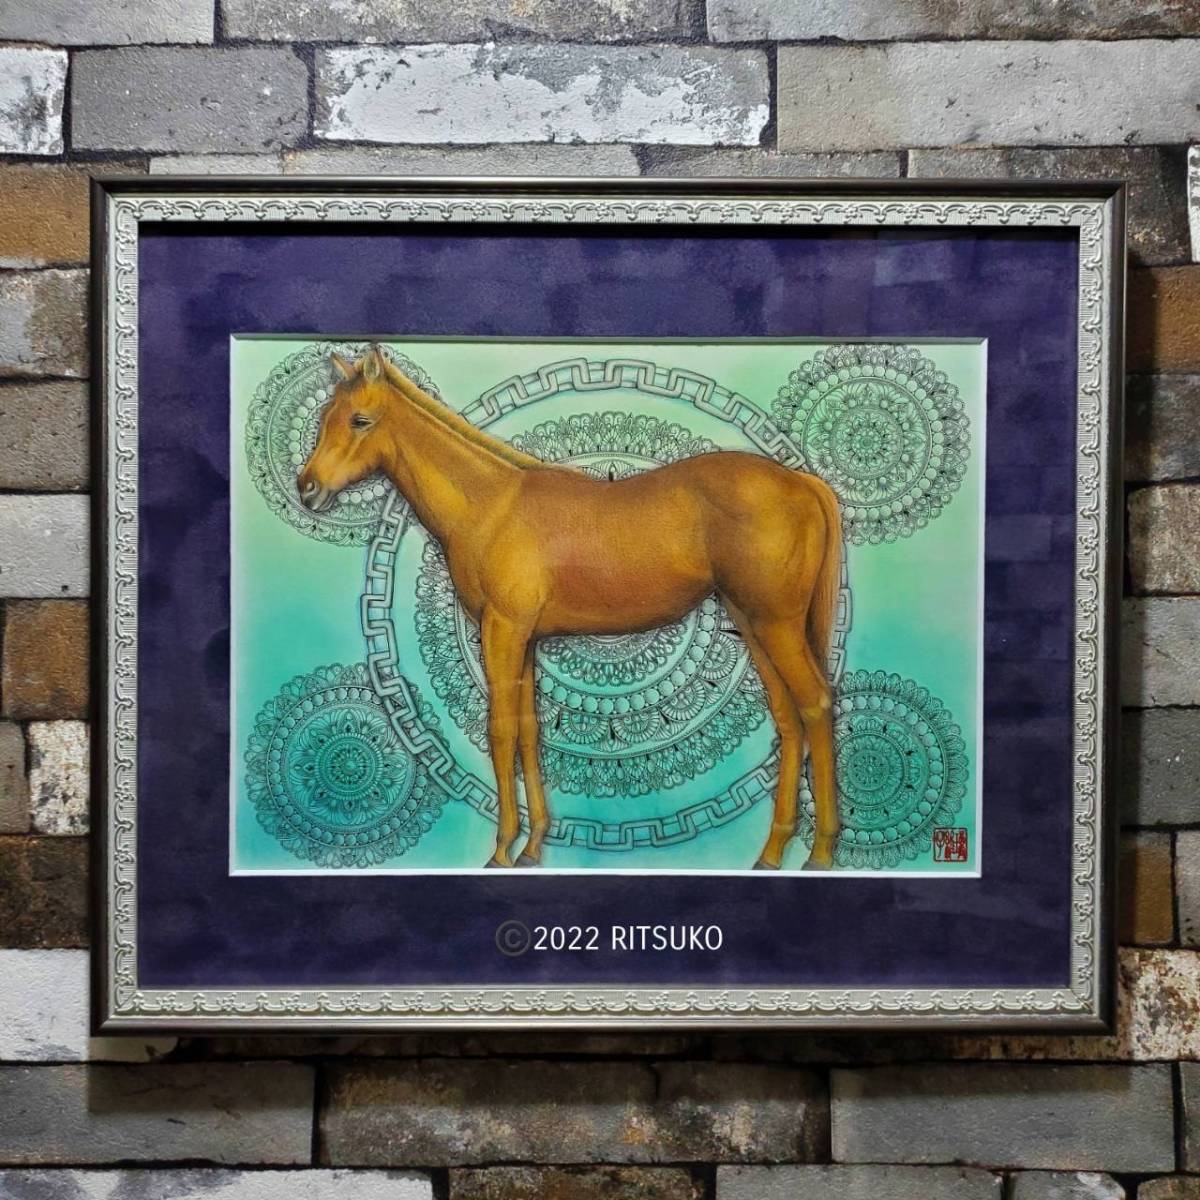 Original one-of-a-kind Ballpoint Pen Drawing Colored Pencil Drawing Japanese Artist Horse Framed Framed Horse Picture Painting Art Interior Modern Art Good Luck Sauma New, artwork, painting, others